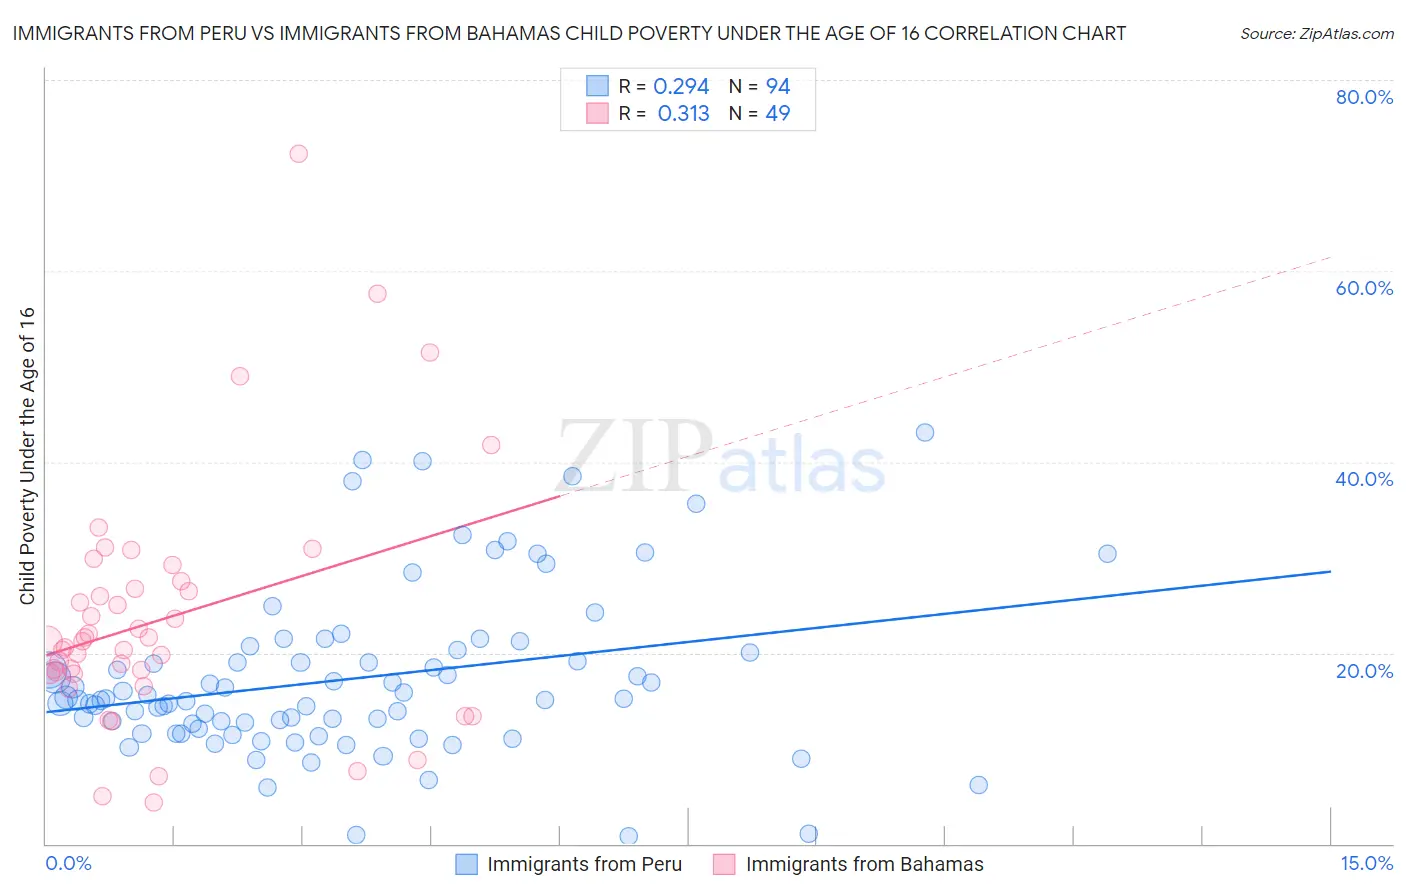 Immigrants from Peru vs Immigrants from Bahamas Child Poverty Under the Age of 16